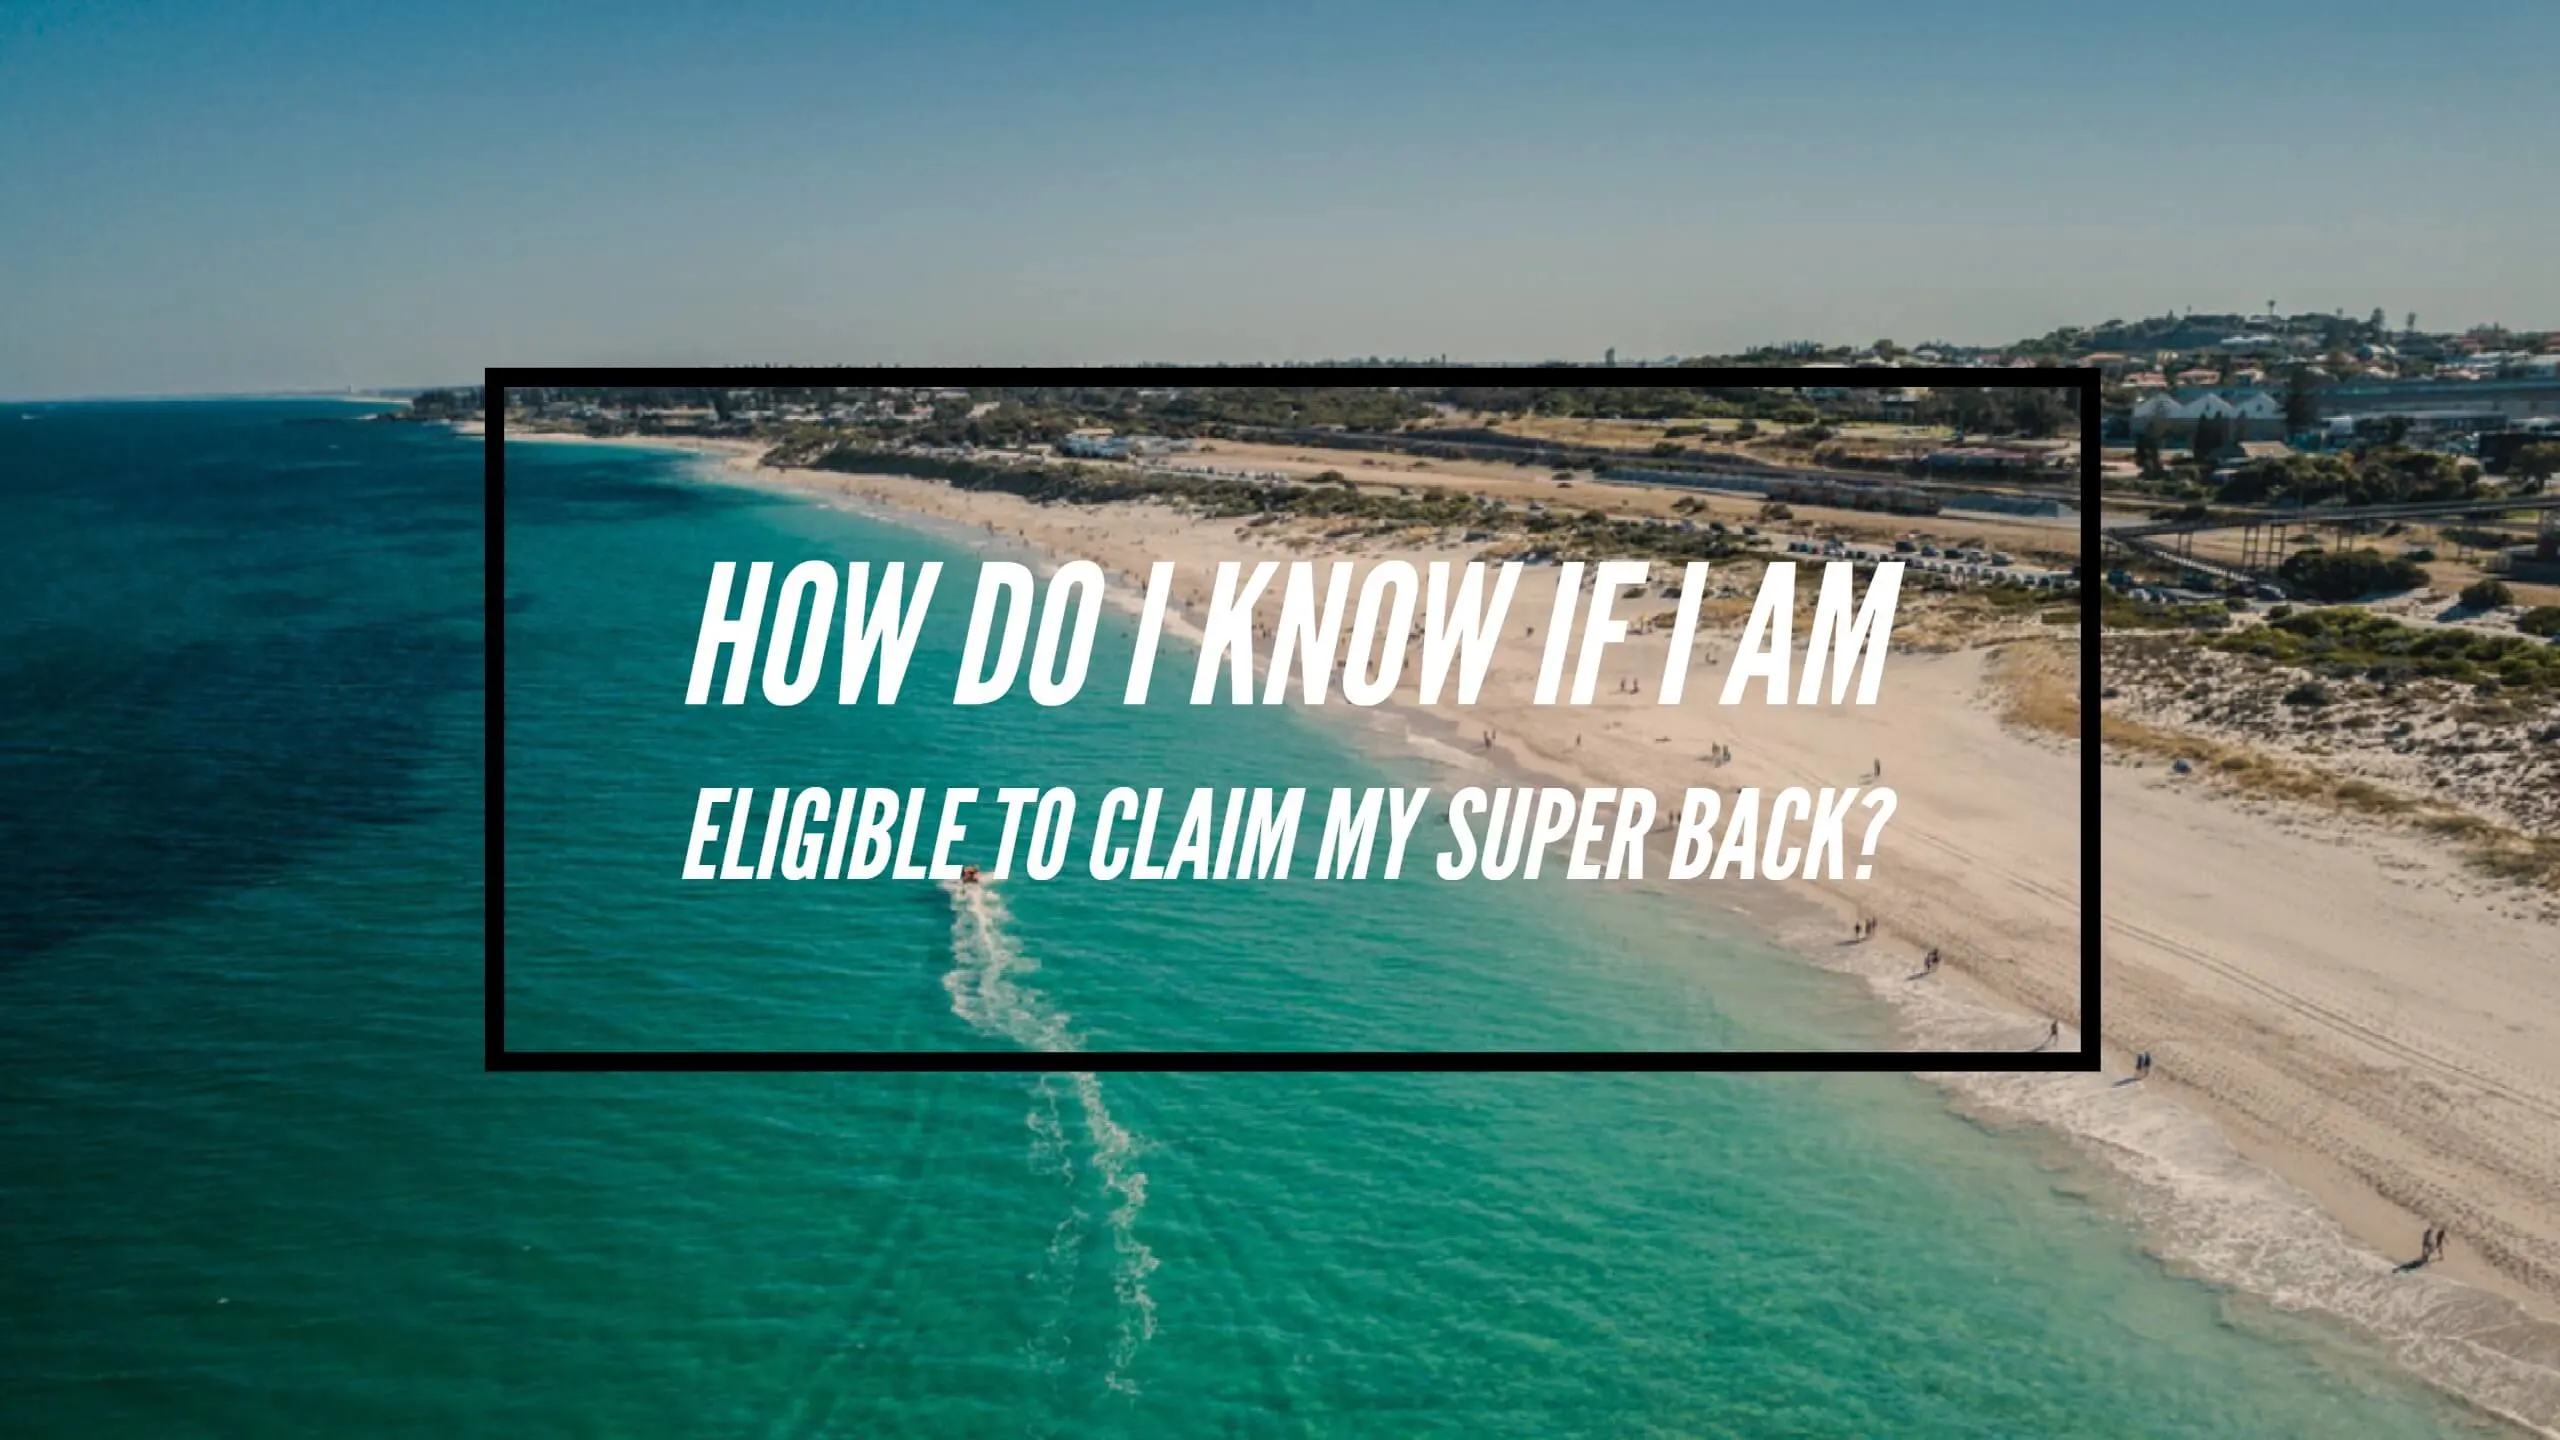 How do I know if I am eligible to claim my super back - claiming your superannuation back